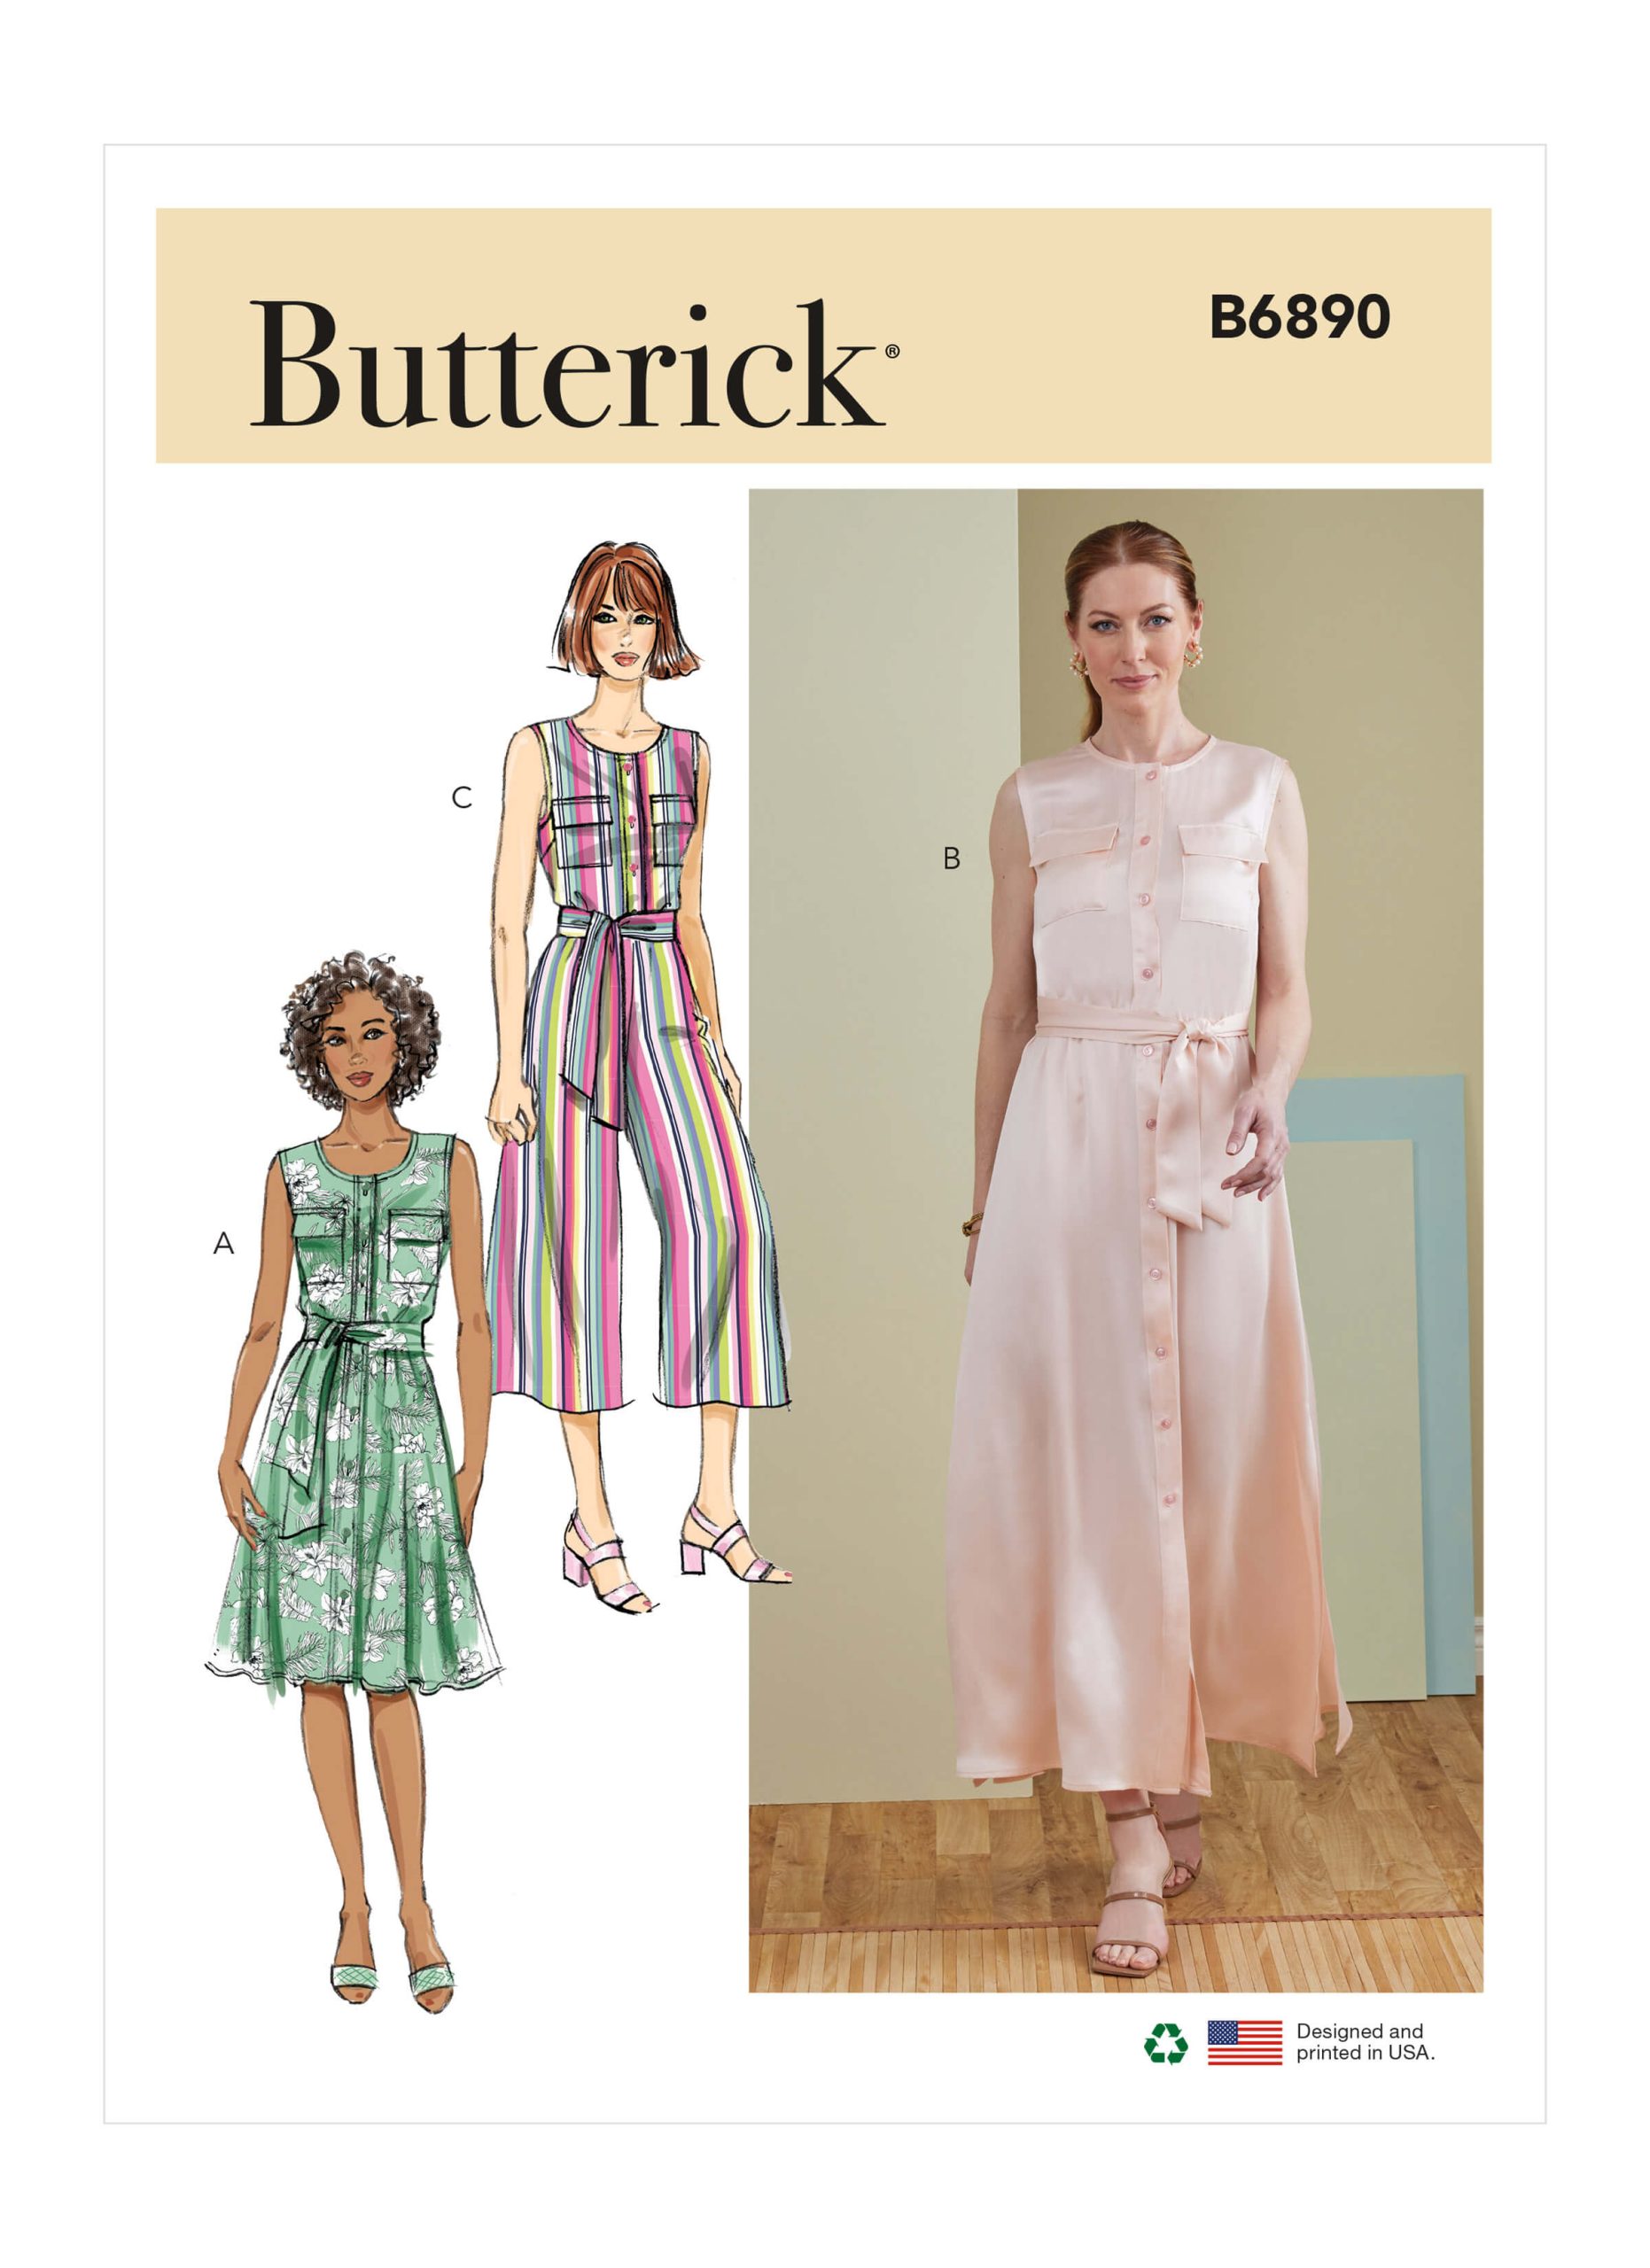 Butterick Sewing Pattern B6890 Misses' Dress, Jumpsuit and Sash